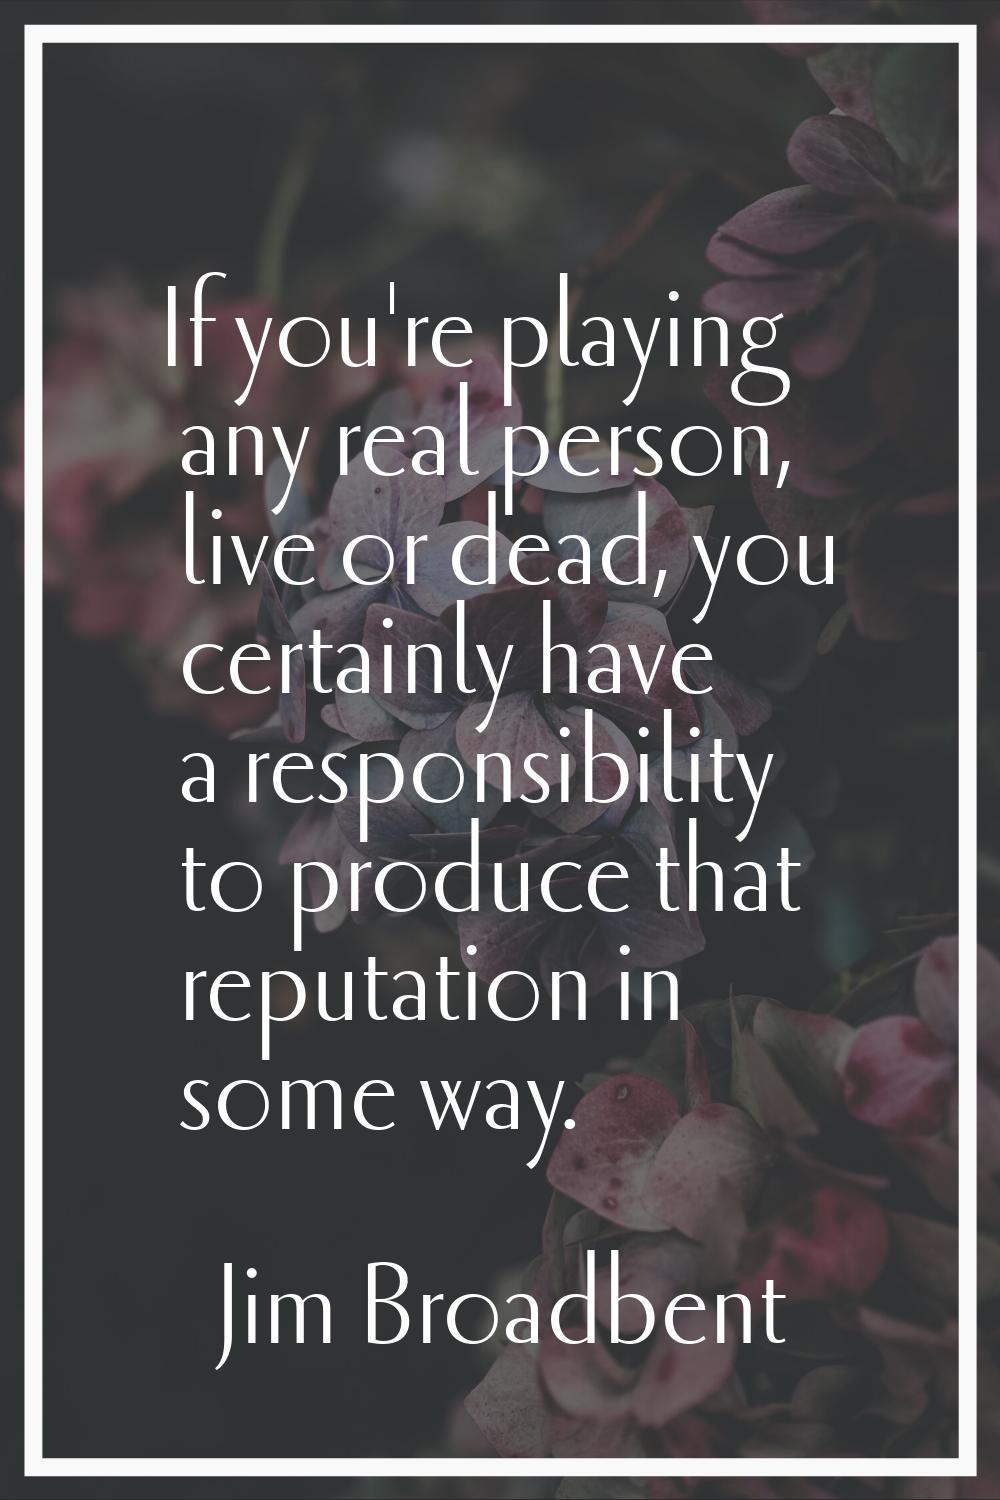 If you're playing any real person, live or dead, you certainly have a responsibility to produce tha